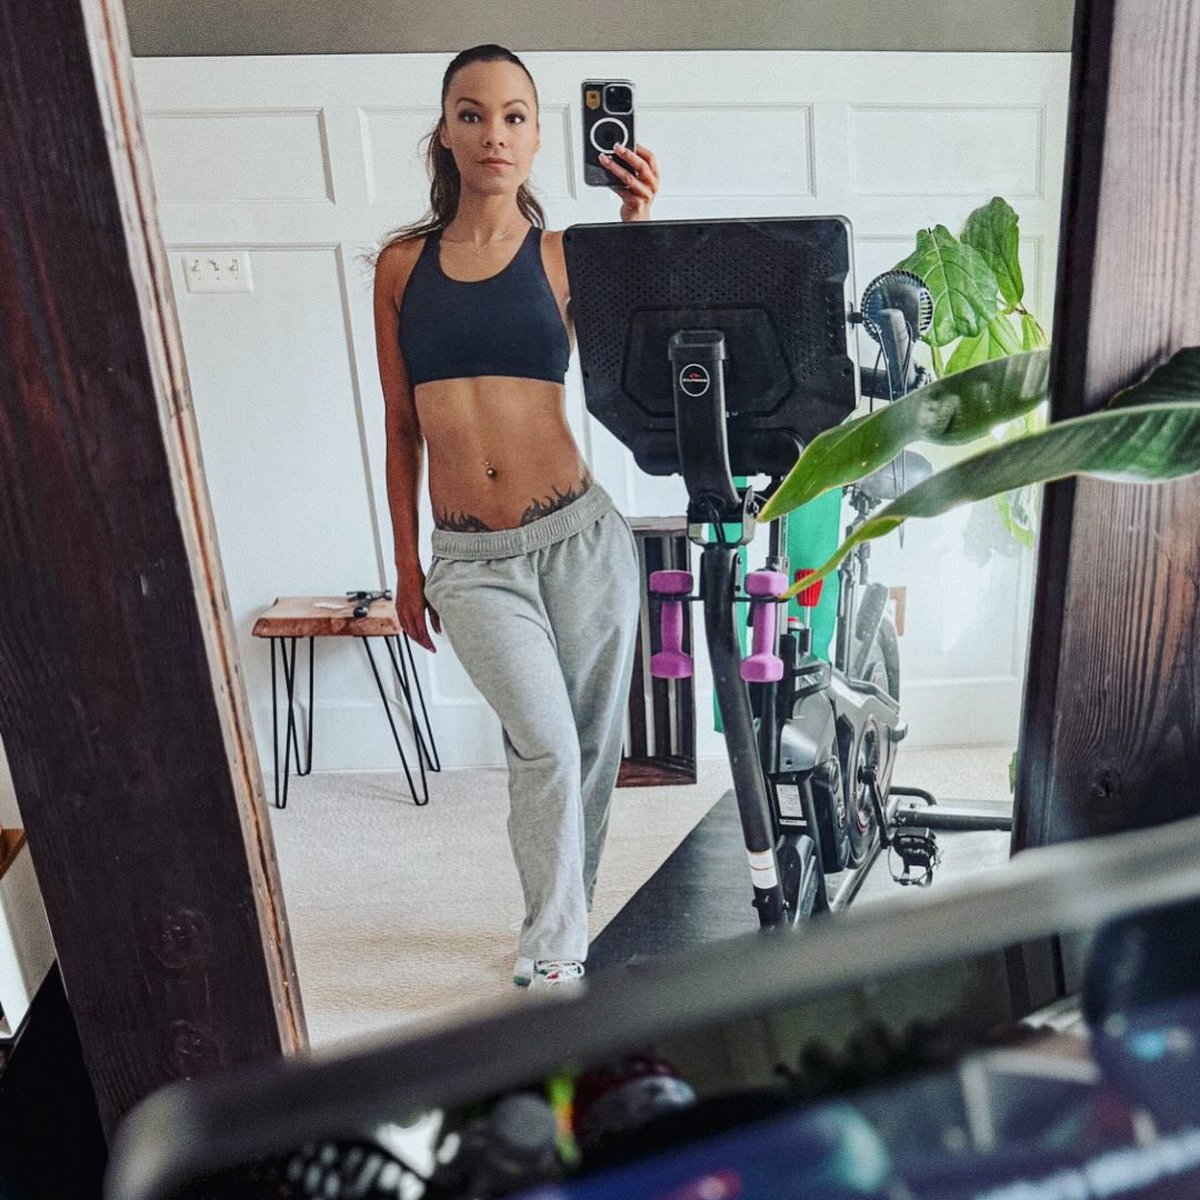 ALWAYS tag us in your workout selfies. 🥰